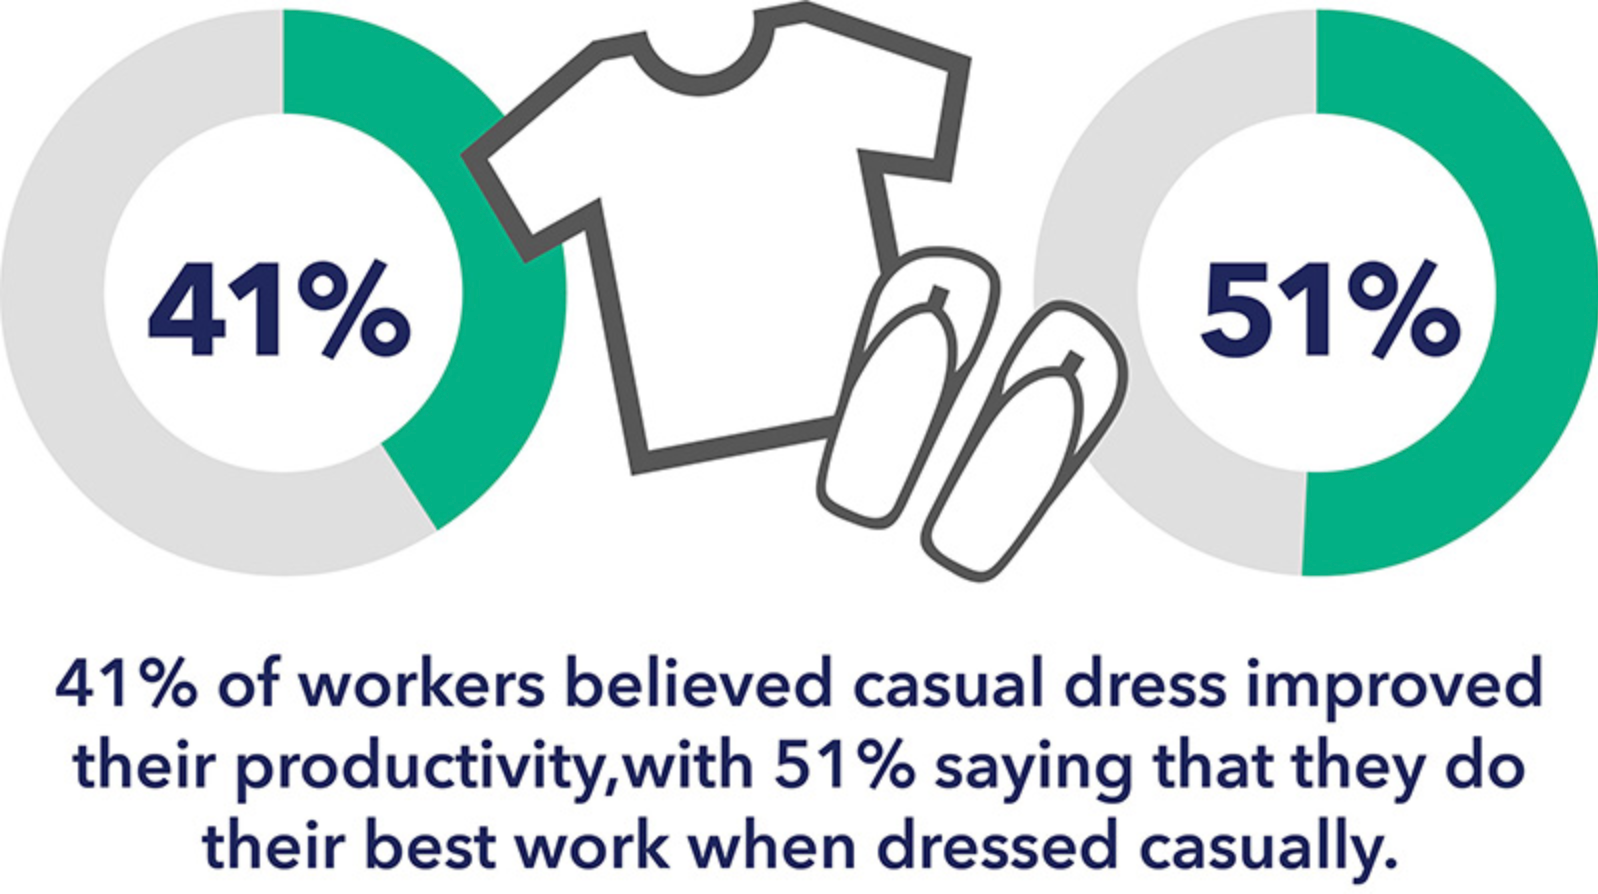 41% of worker believed causal dress improved their productivity